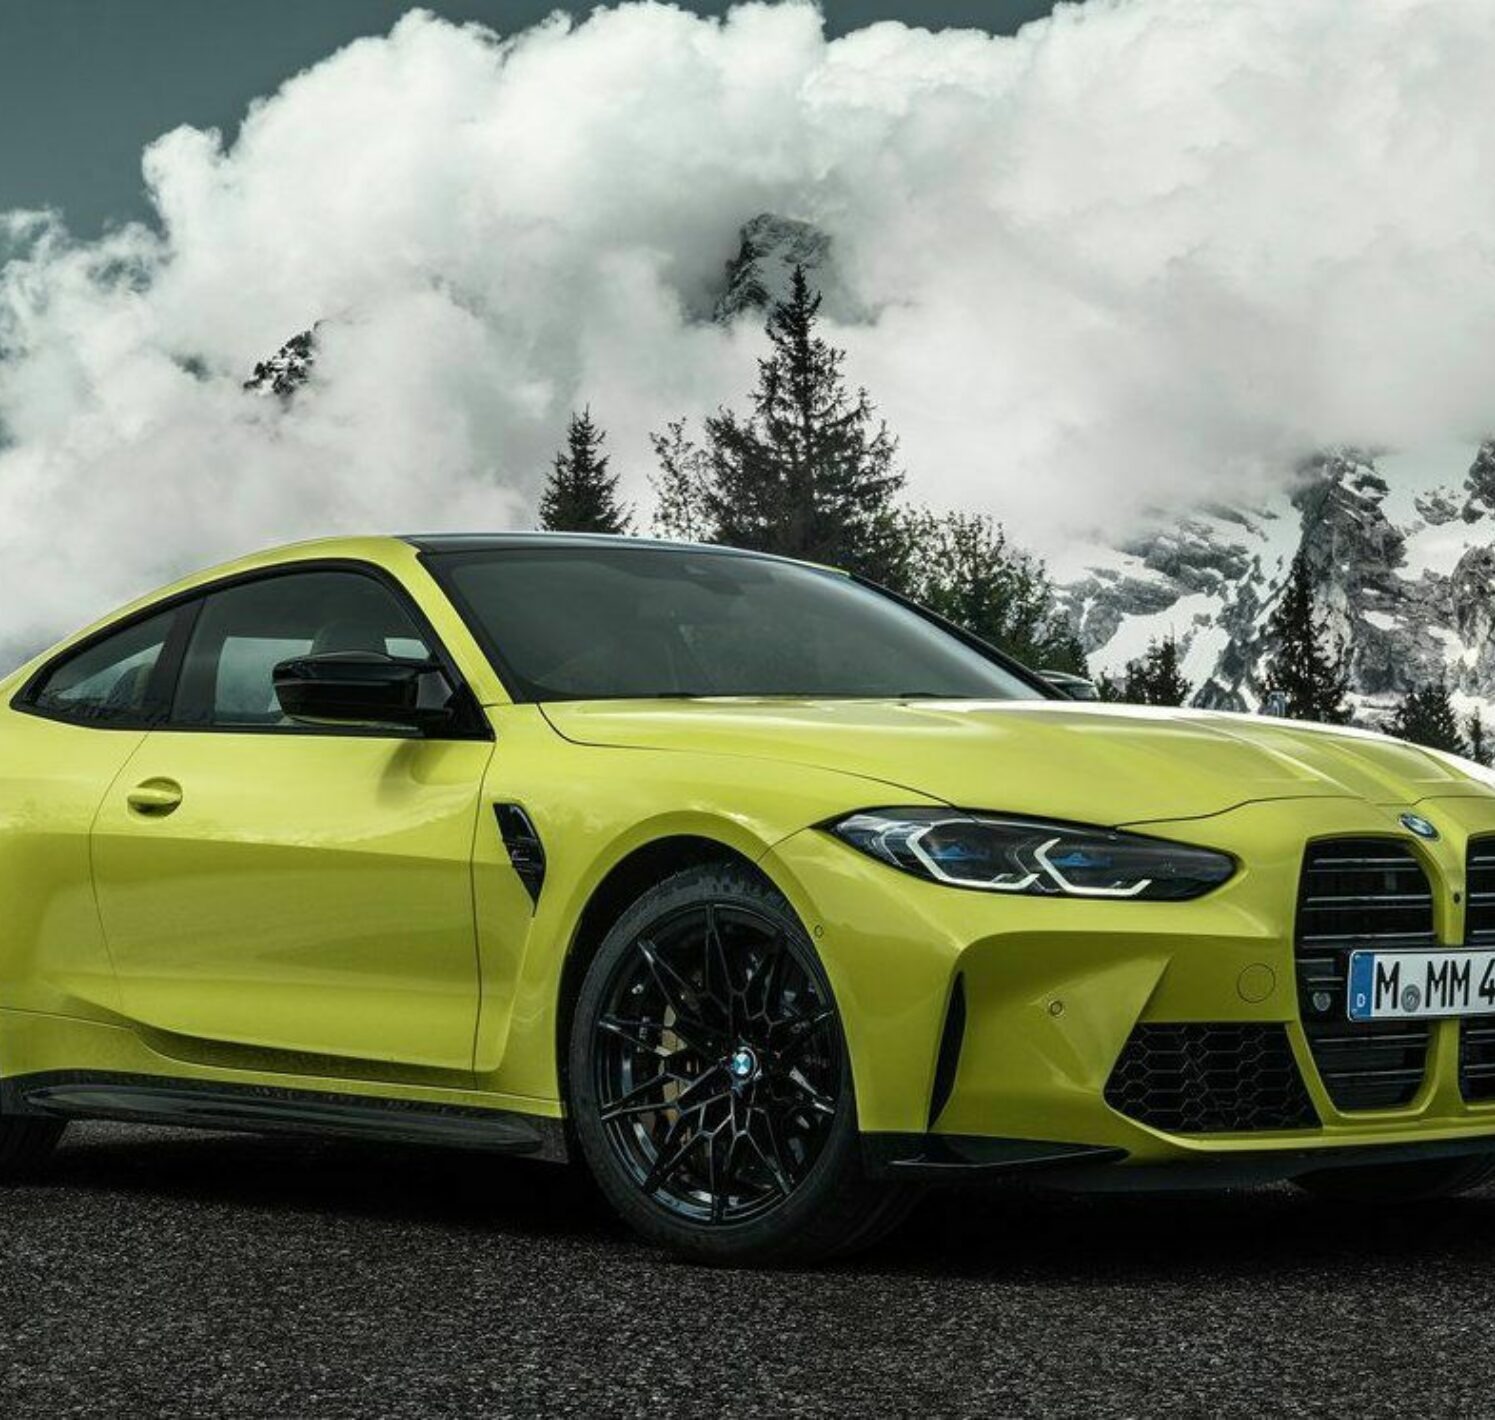 https://autofilter.sk/assets/images/rad-4-coupe-2/gallery/bmw-m4-coupe-competition-2021_24-galeria.jpg - obrazok